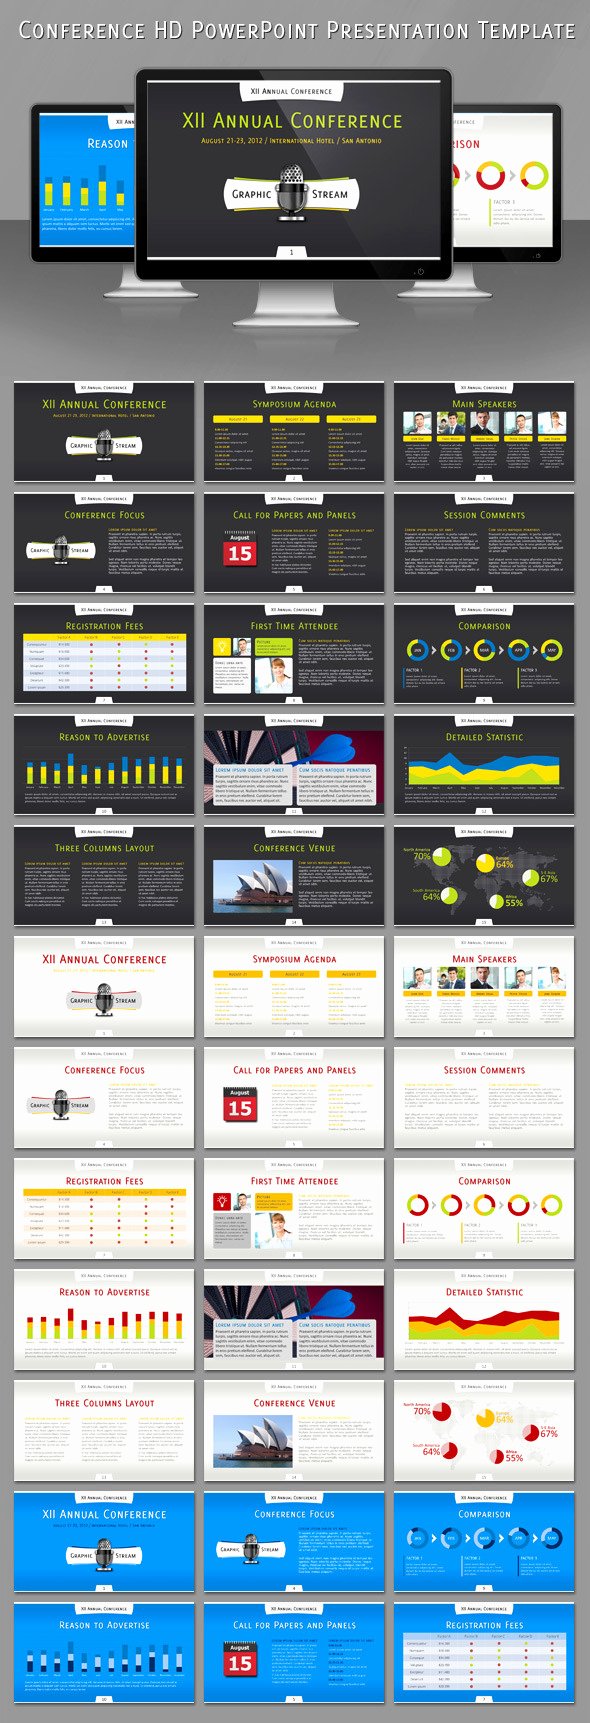 Conference Presentation Ppt Template Awesome Conference Hd Powerpoint Presentation Template